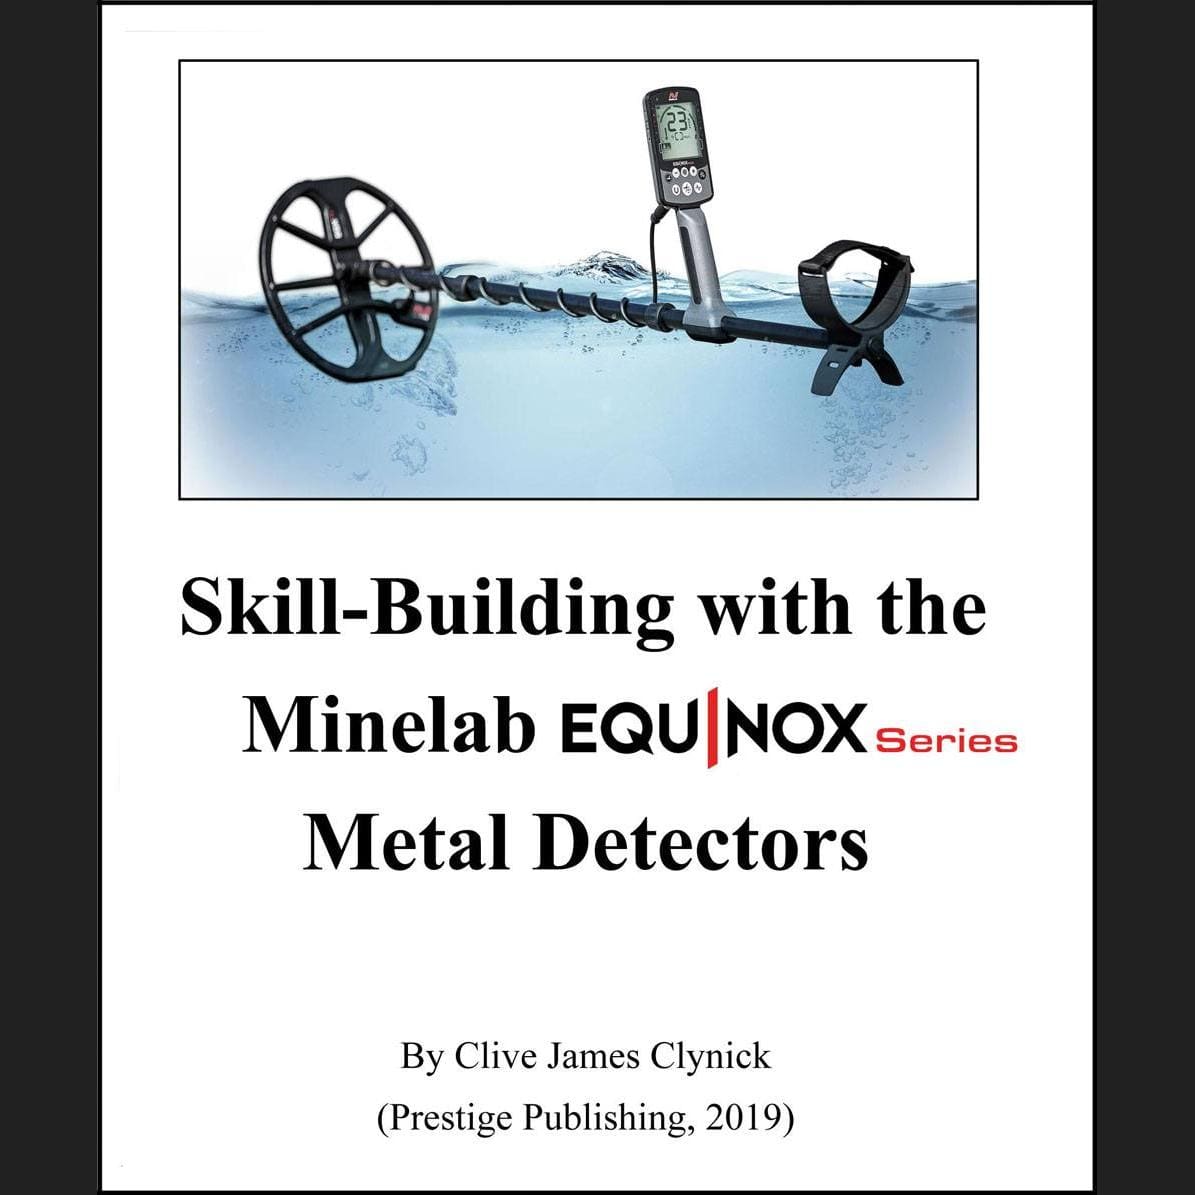 Skill-Building with the Minelab Equinox Metal Detector